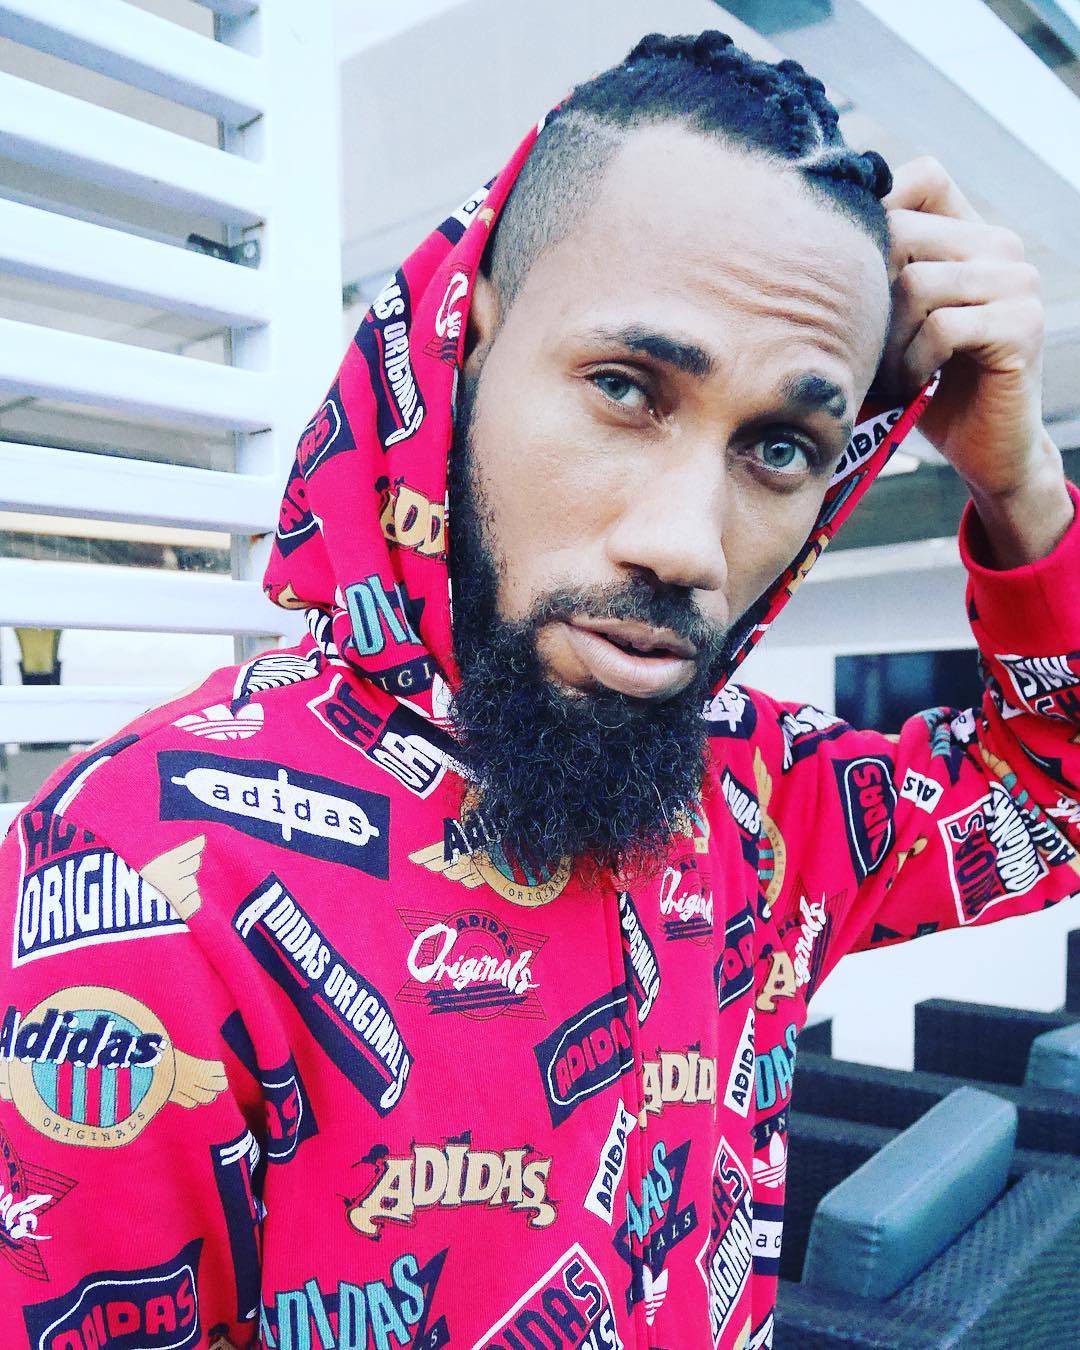 BellaNaija - My music is not guided by audience perception - Phyno